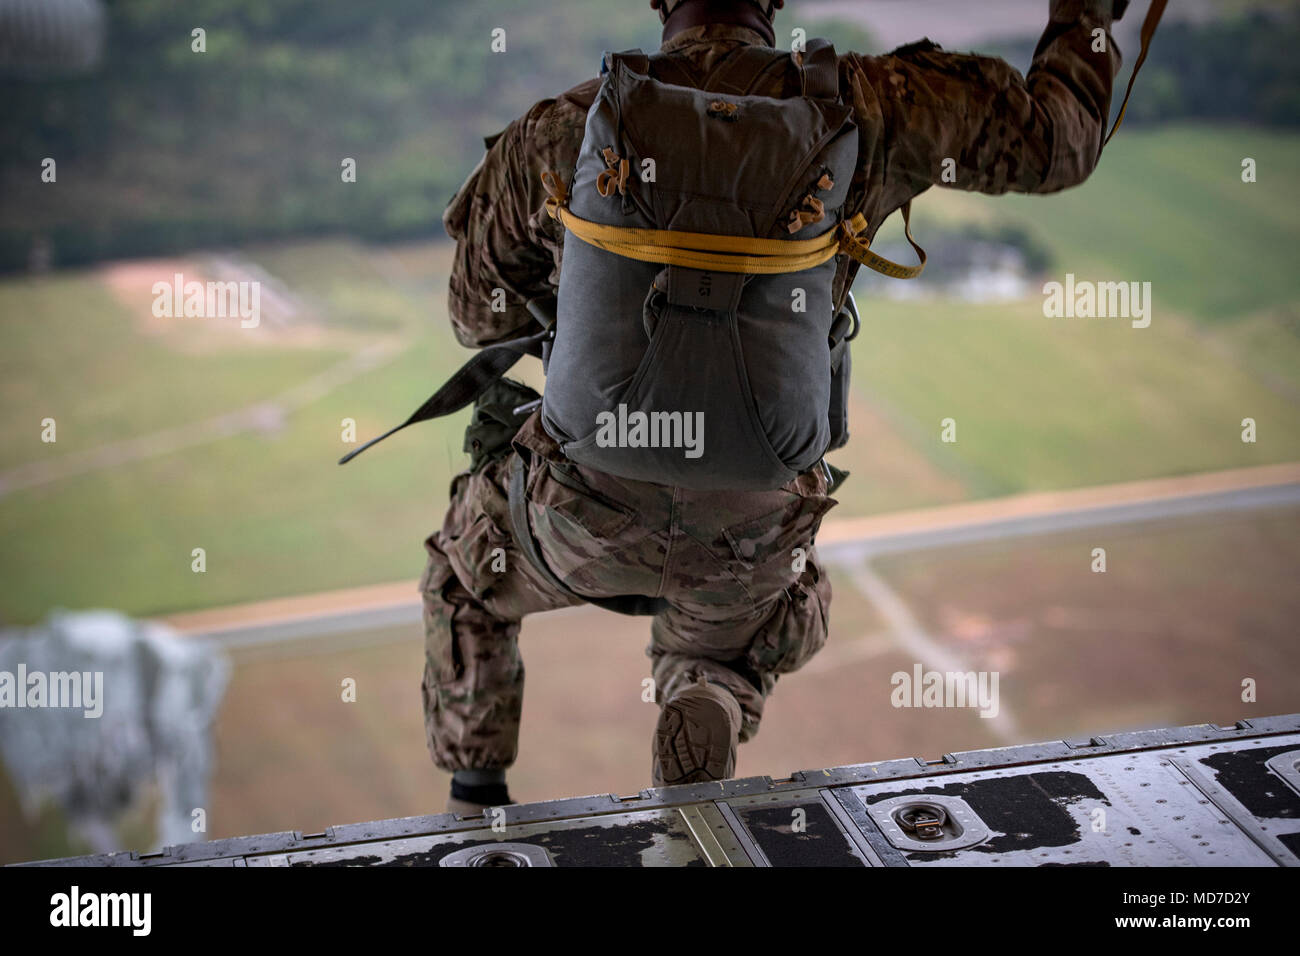 An Airman from the 820th Base Defense Group jump from an HC-130J Combat King II during static-line jump proficiency training, March 30, 2018, in the skies over Moody Air Force Base, Ga. The 820th BDG and the 71st RQS work together frequently so the defenders and the aircrew can maintain their qualifications. (U.S. Air Force photo by Staff Sgt. Ryan Callaghan) Stock Photo